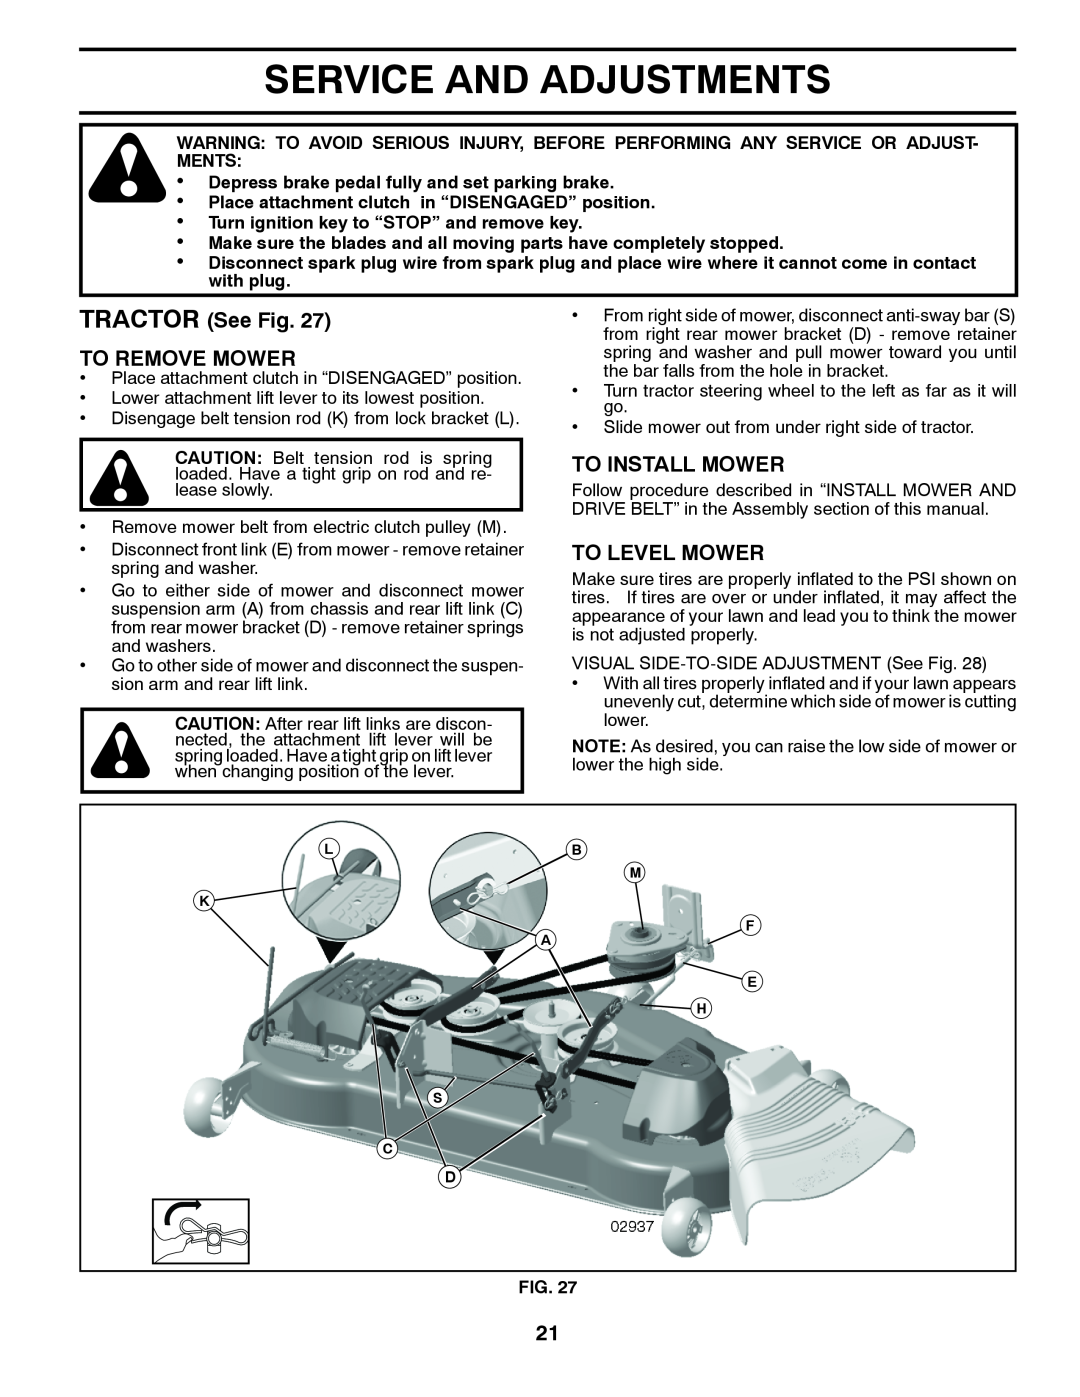 Poulan PBGT26H54 manual Service And Adjustments, TRACTOR See Fig TO REMOVE MOWER, To Install Mower, To Level Mower 